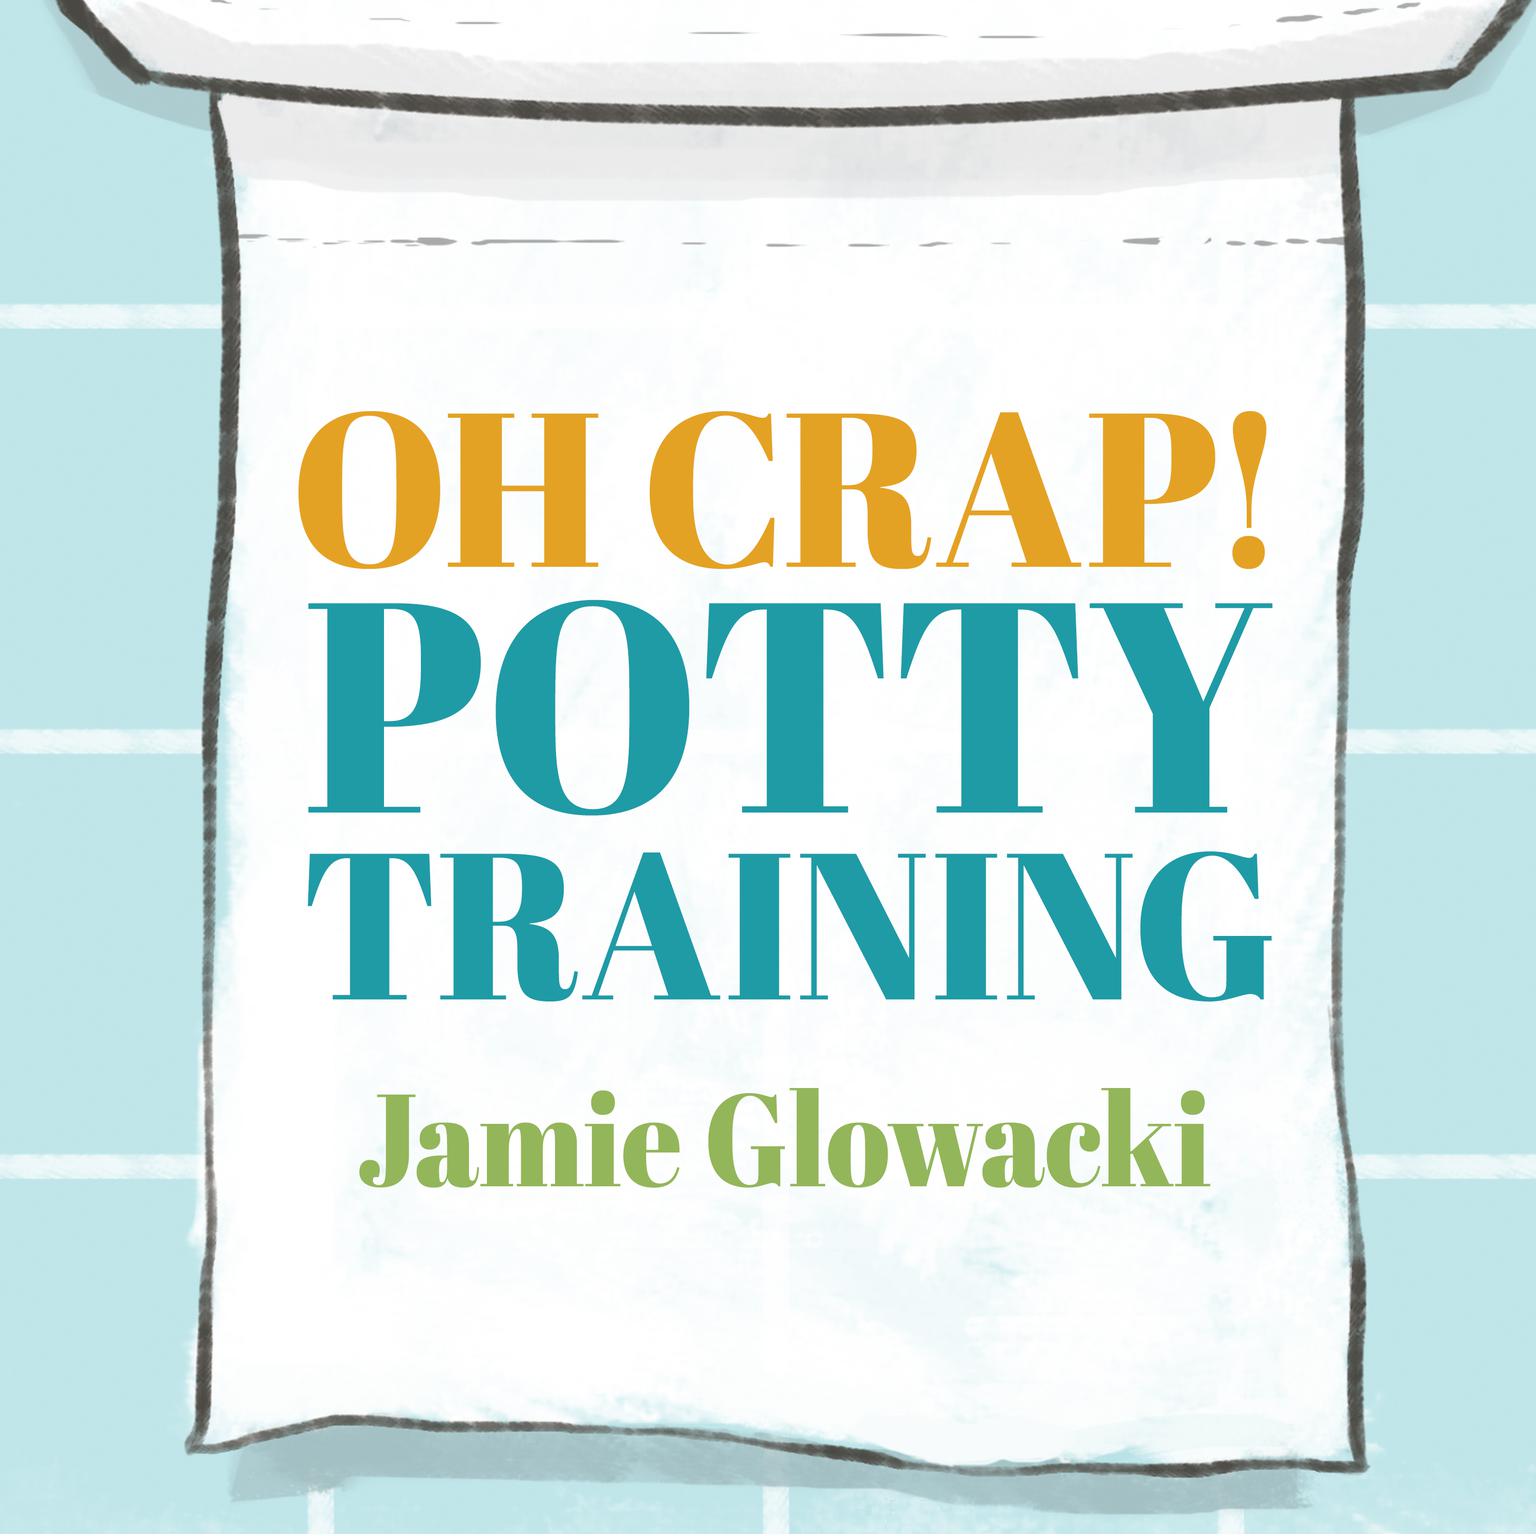 Oh Crap! Potty Training: Everything Modern Parents Need to Know to Do It Once and Do It Right Audiobook, by Jamie Glowacki